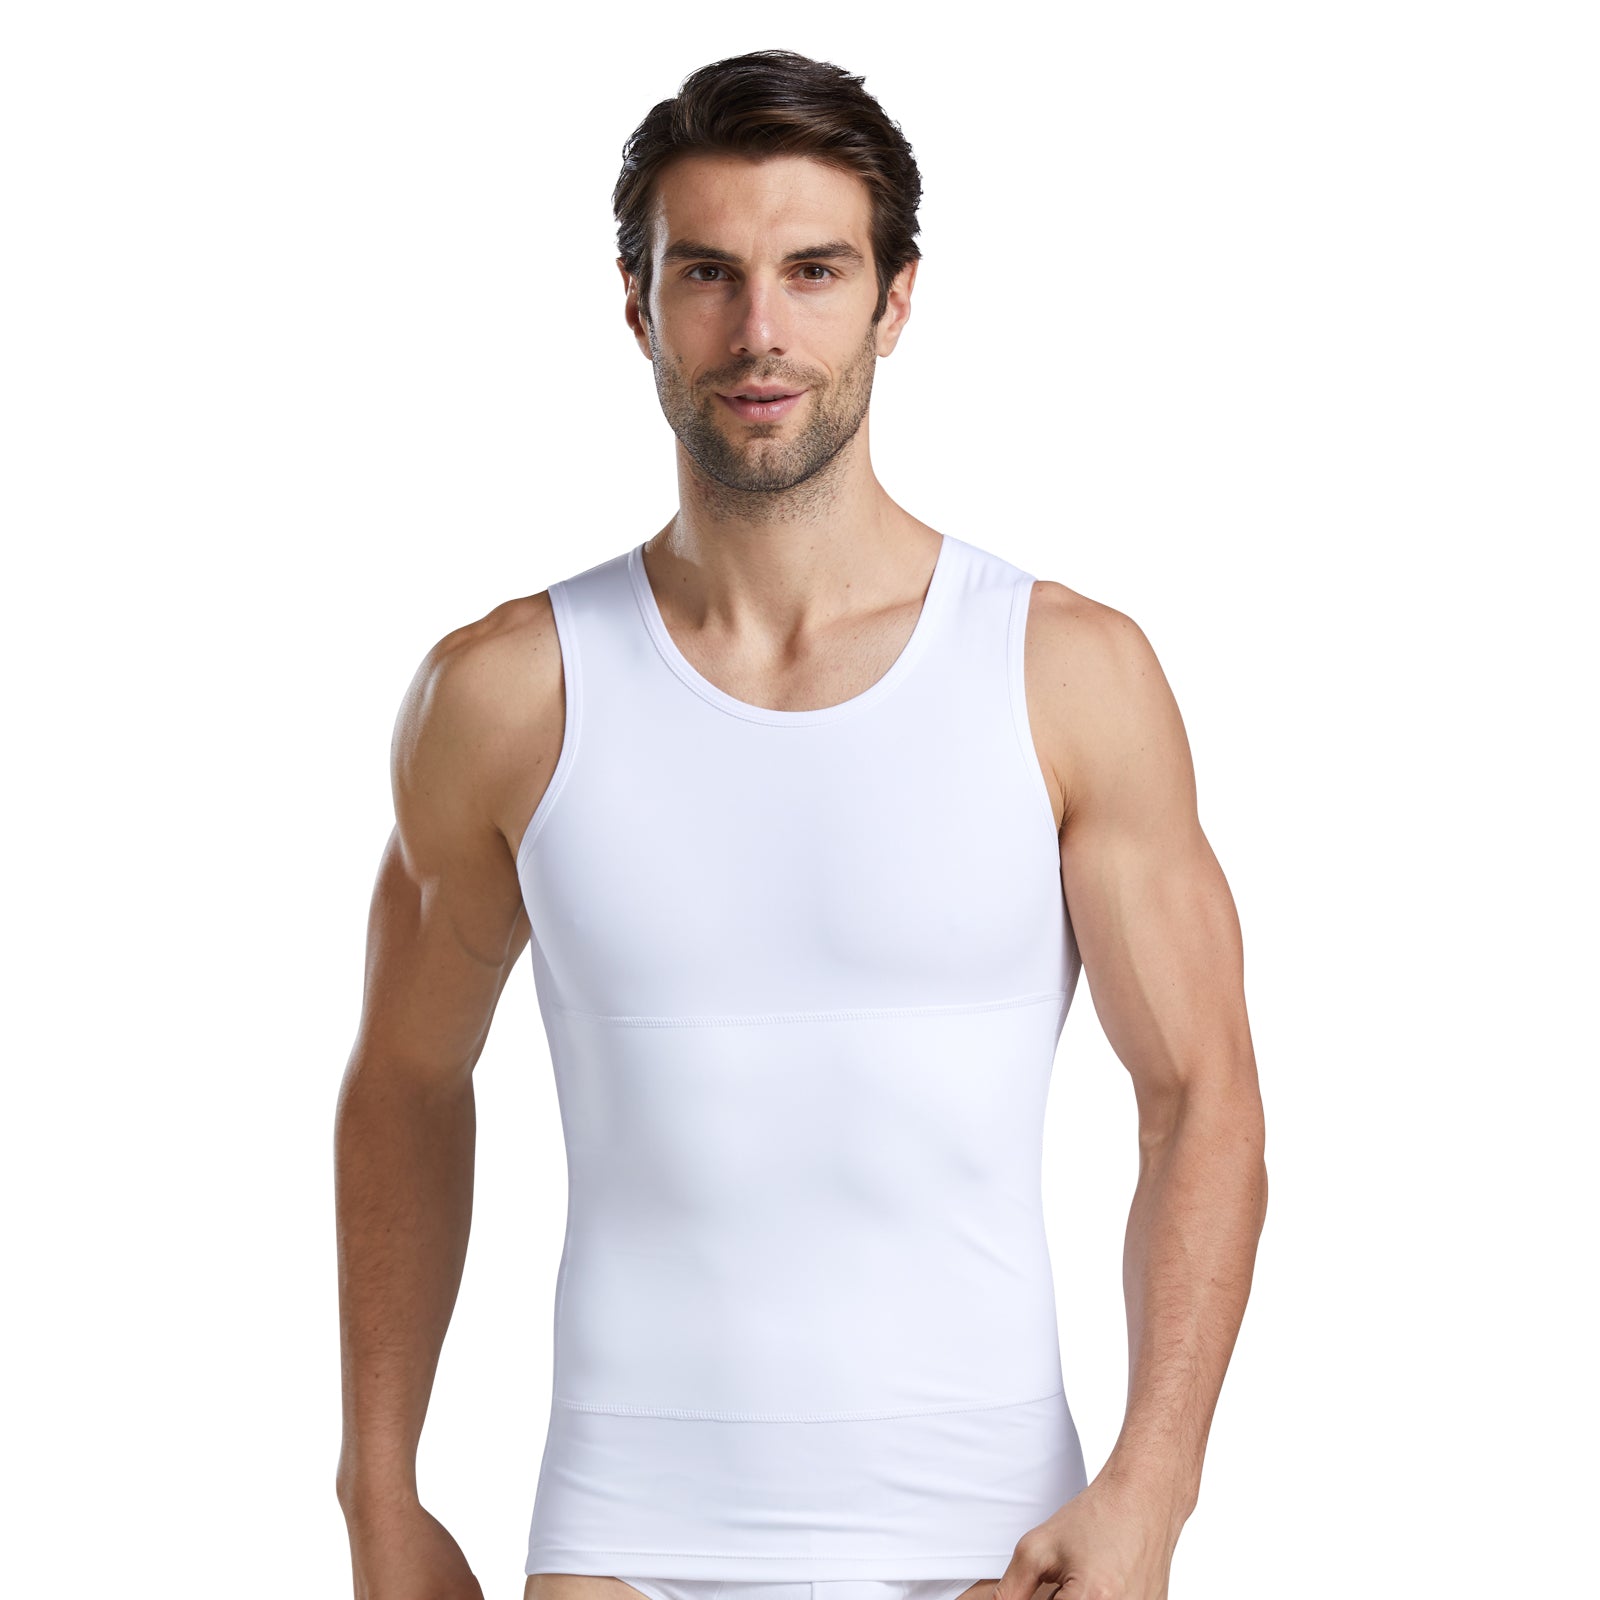 Just One Shapers Seamless Slimming Shirt for Men - Online Shopping